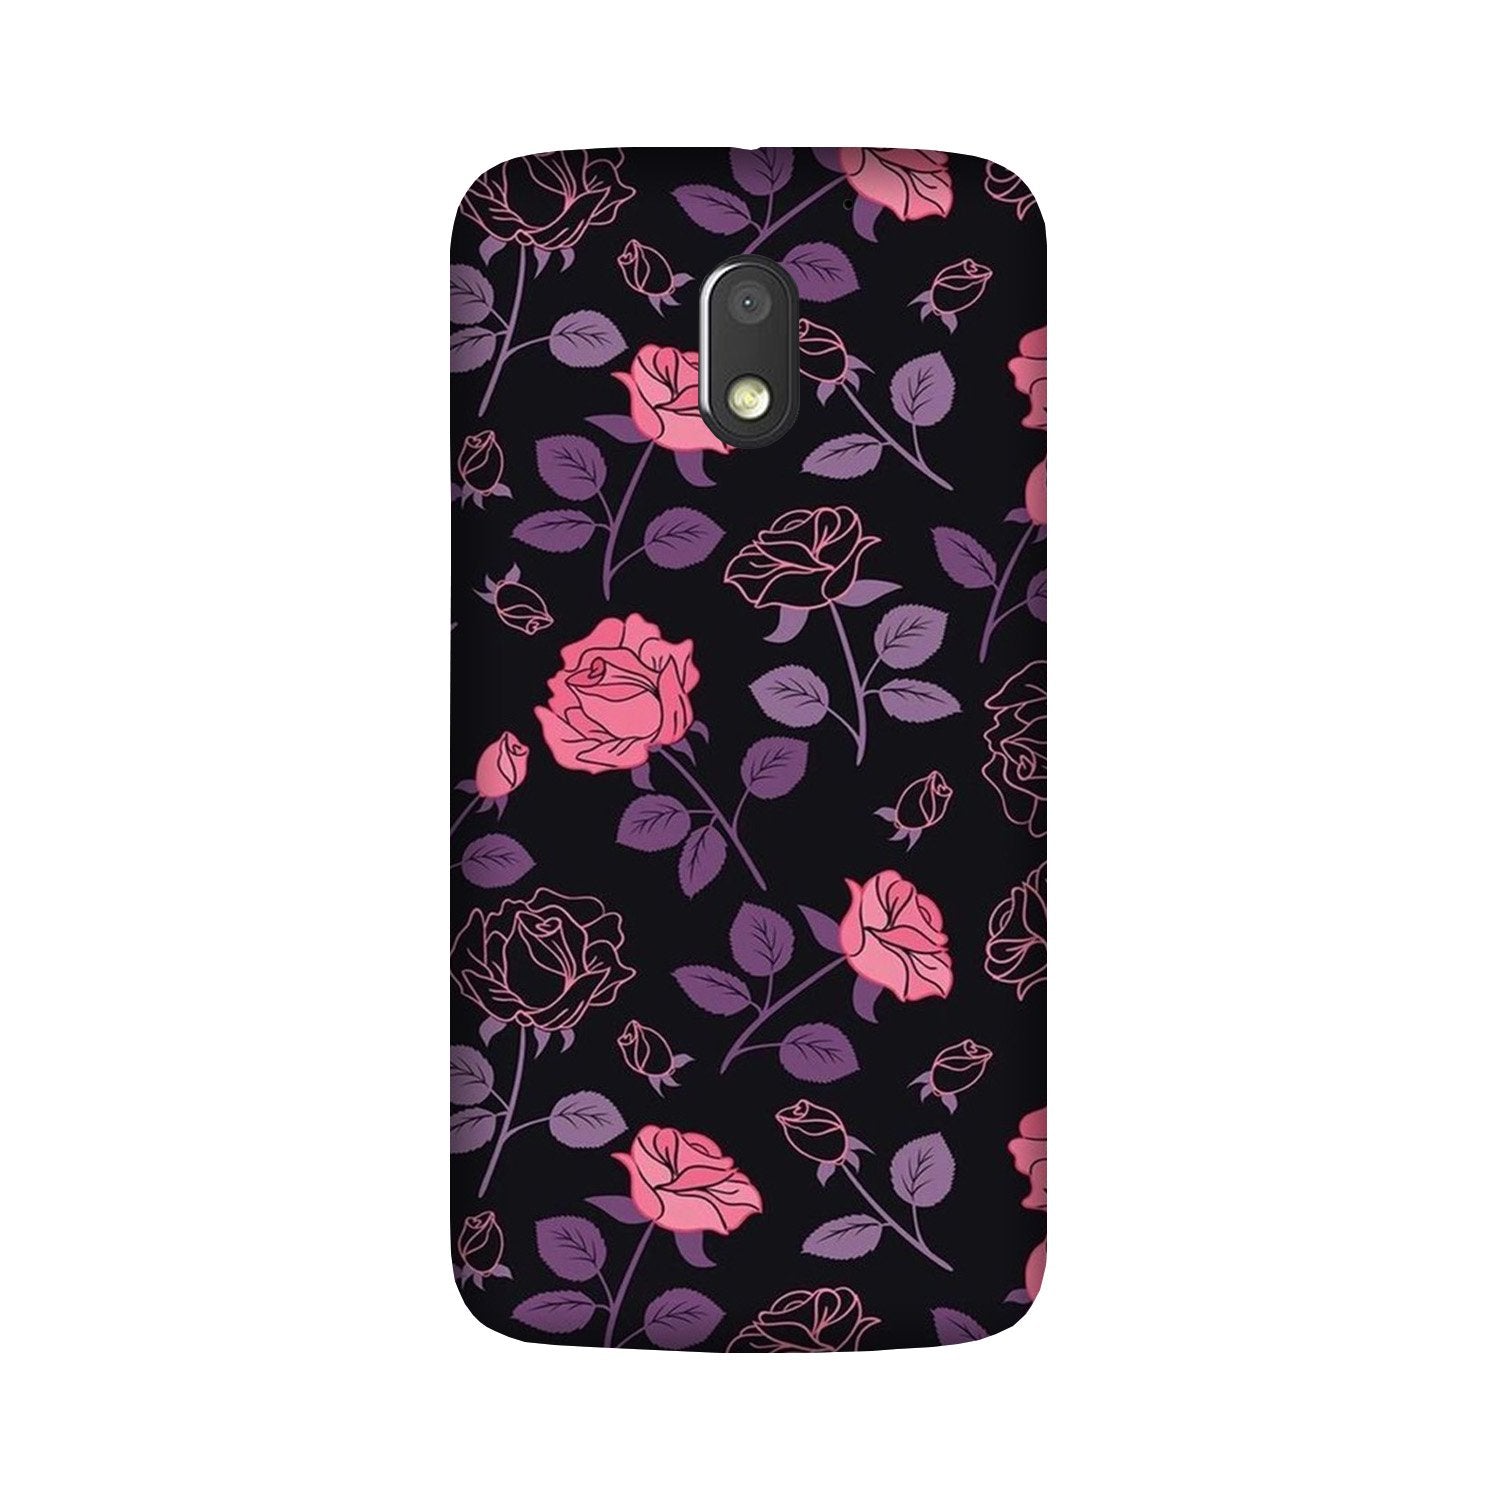 Rose Pattern Case for Moto G4 Play